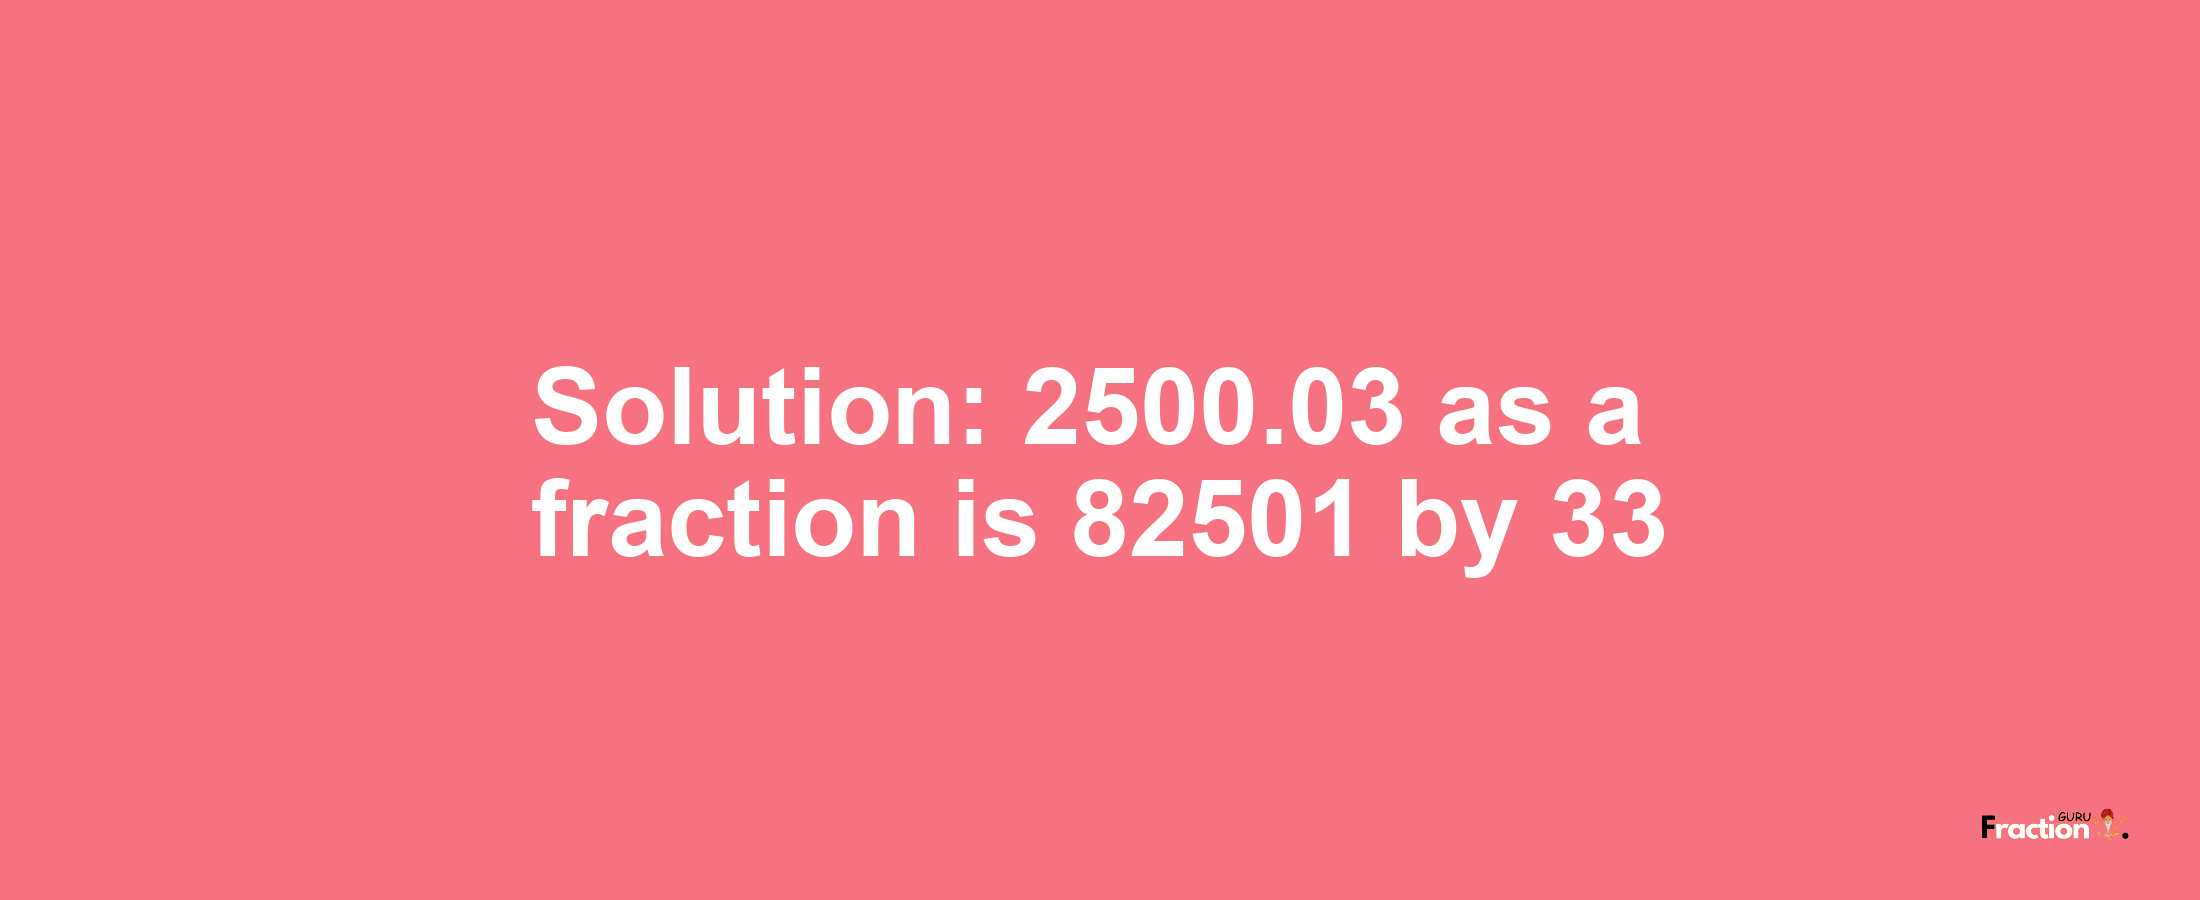 Solution:2500.03 as a fraction is 82501/33